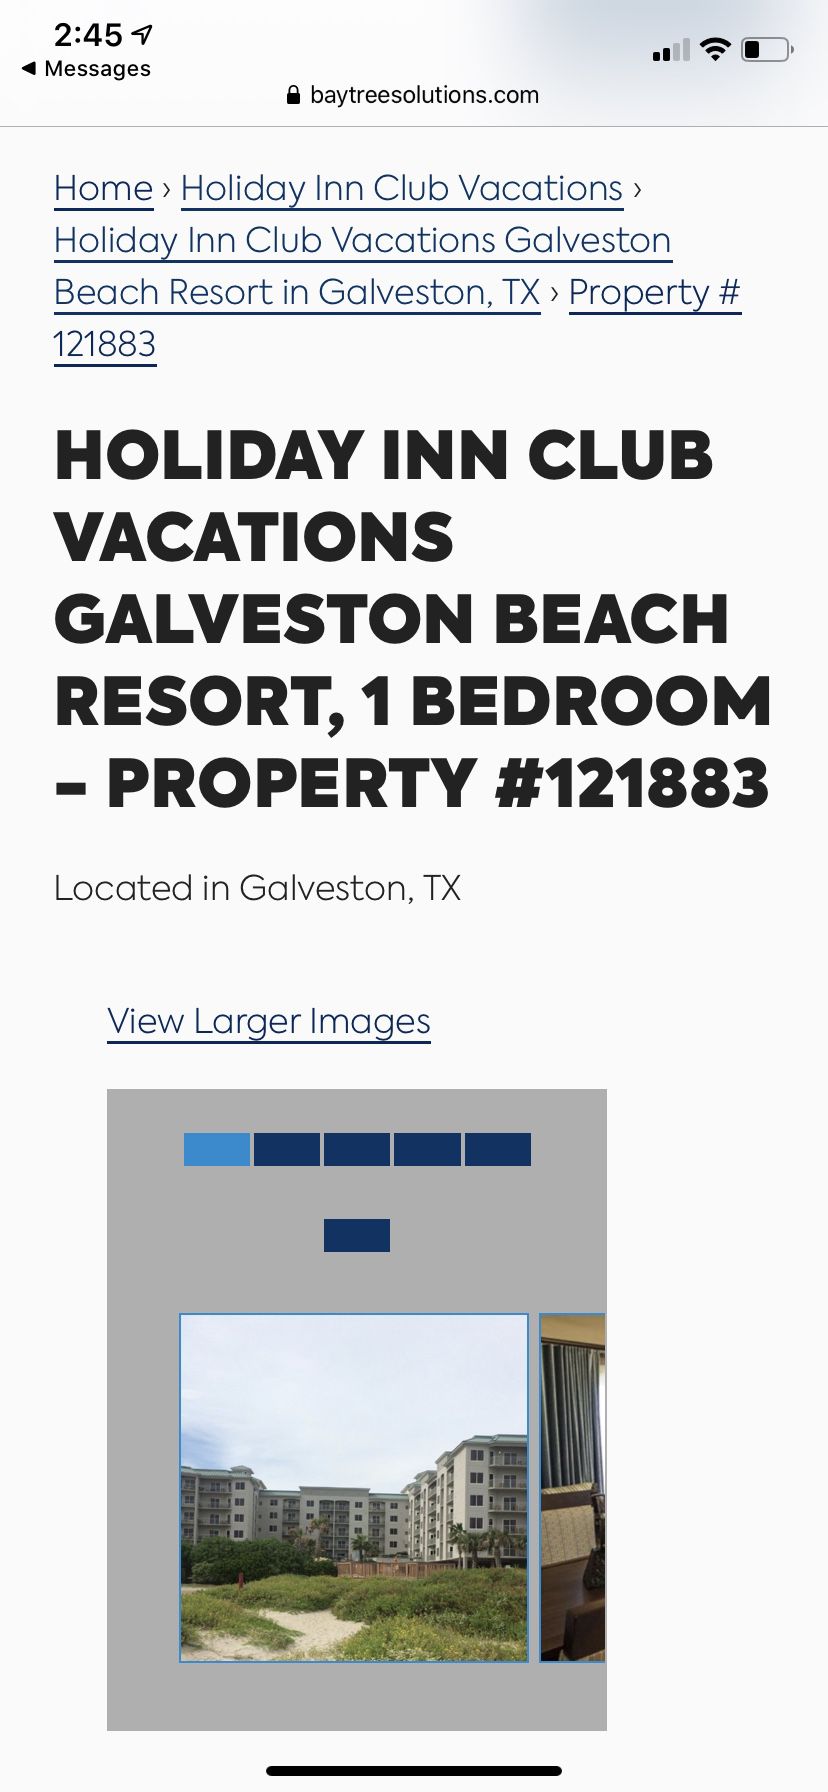 Holiday Inn Club Vacations Galveston Beach Resort can be used at any Holiday Inn Vacation sites and/or RCI